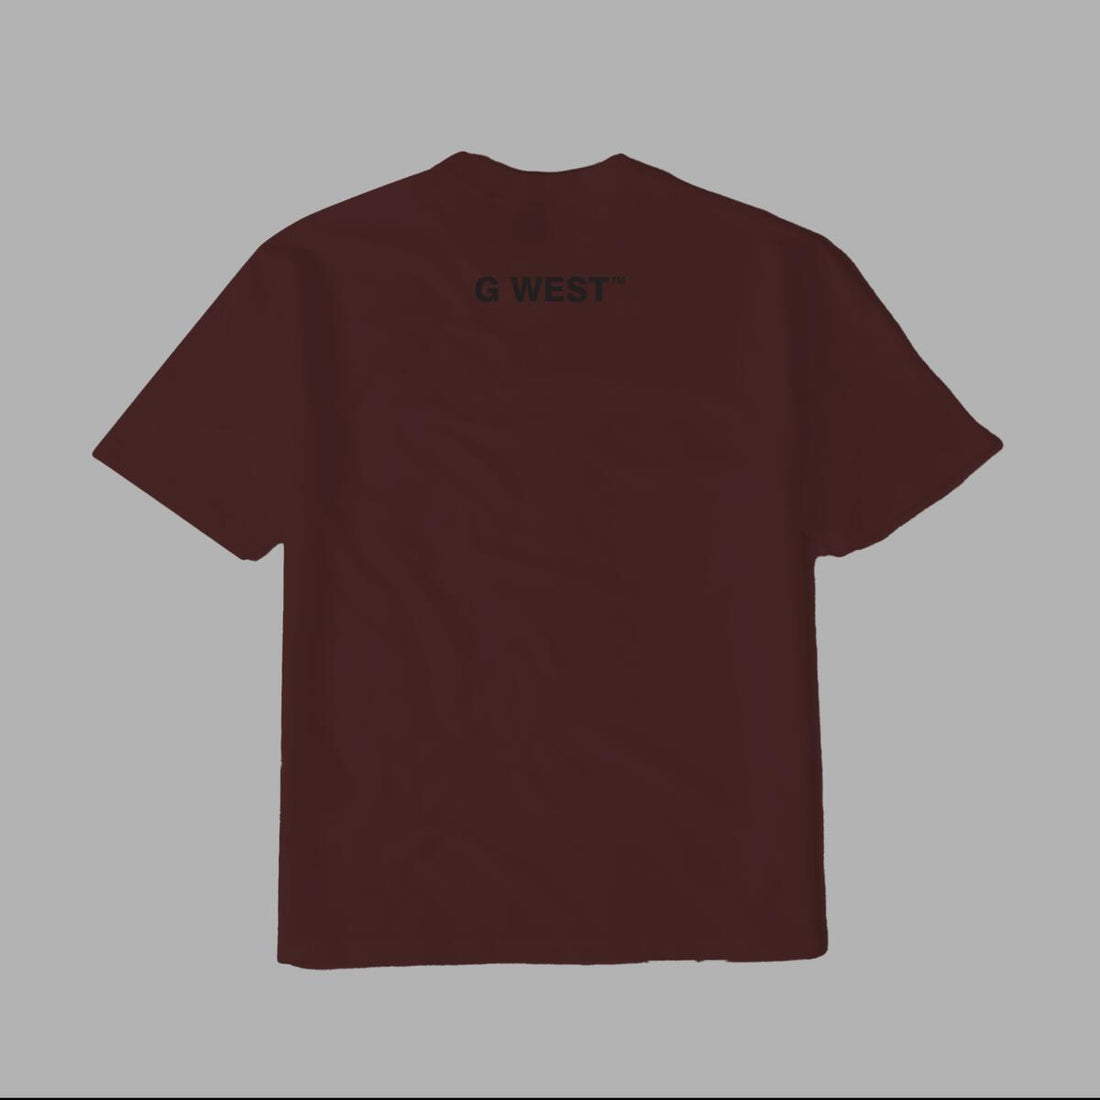 G West OWN YO MIND Front Graphic Tee - BROWN/TAN